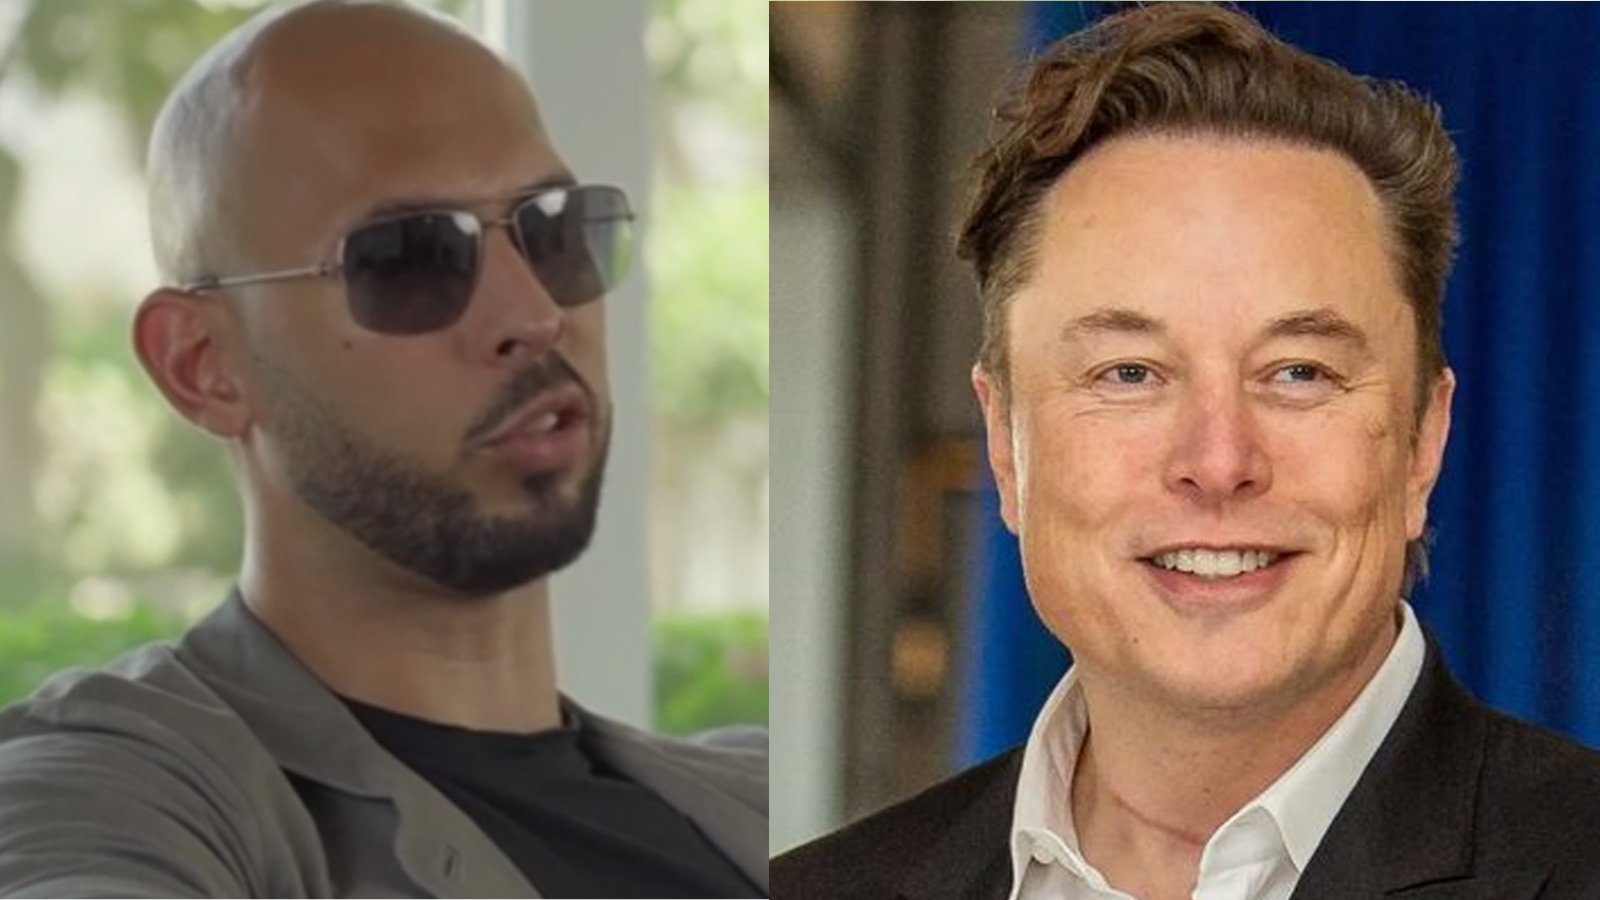 Andrew Tate offers to train Elon Musk for cage fight against Mark Zuckerberg - Dexerto